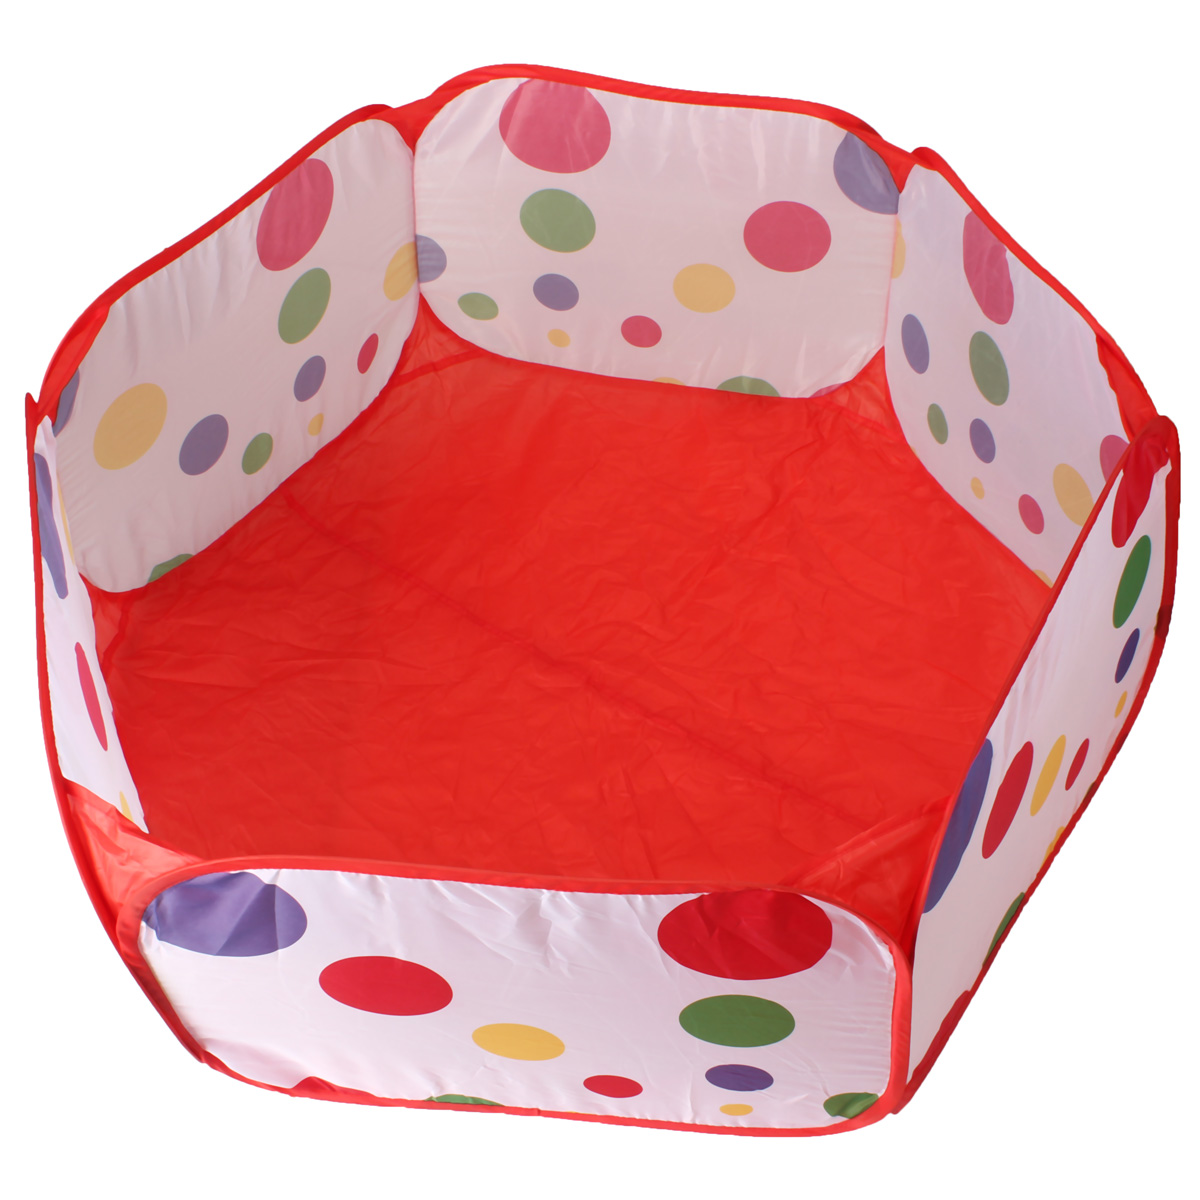 Portable-Foldable-Ocean-Ball-Pit-Pool-Holder-Indoor-Outdoor-Kids-Play-Toys-Tent-1409955-3